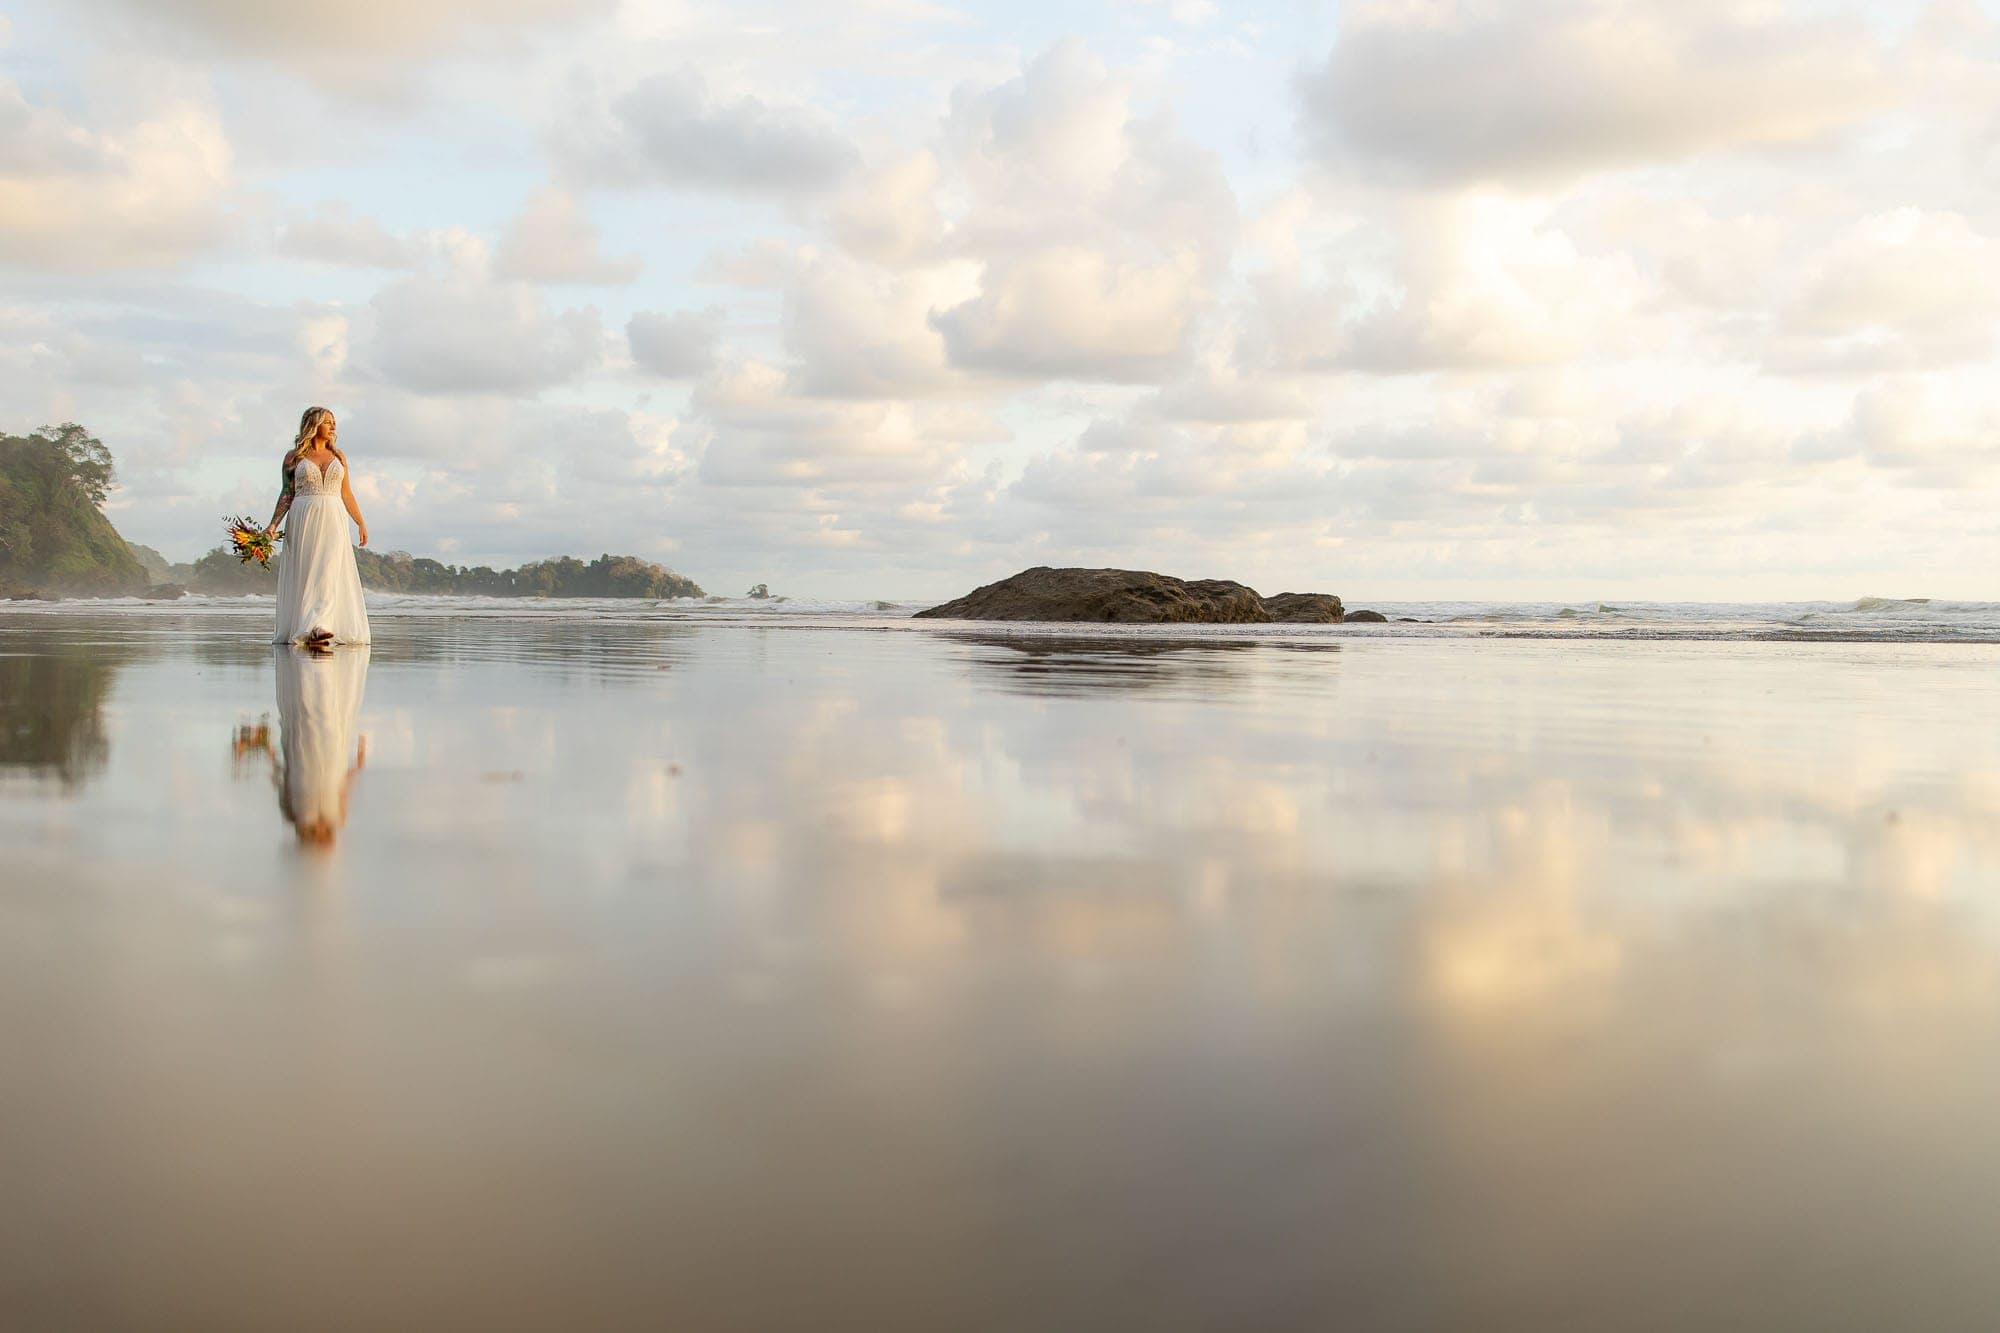 Reflection image of the bride on the beach